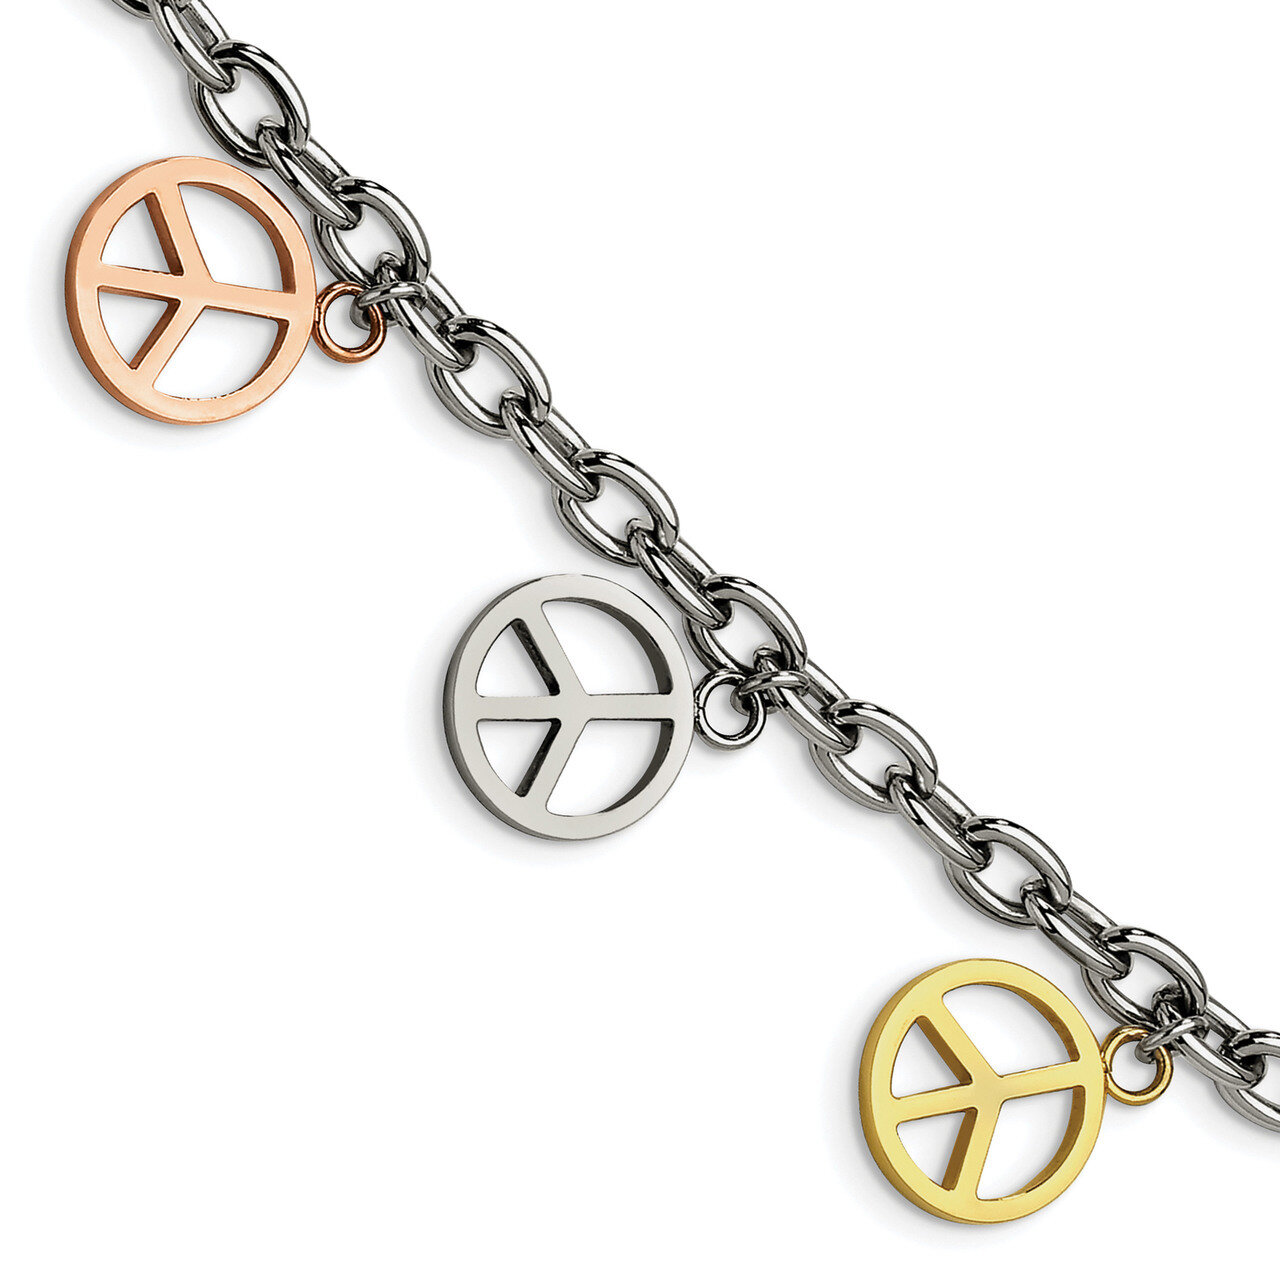 Multicolor Plated Peace Sign Charms 8.5 Inch Bracelet Stainless Steel SRB559-8.5